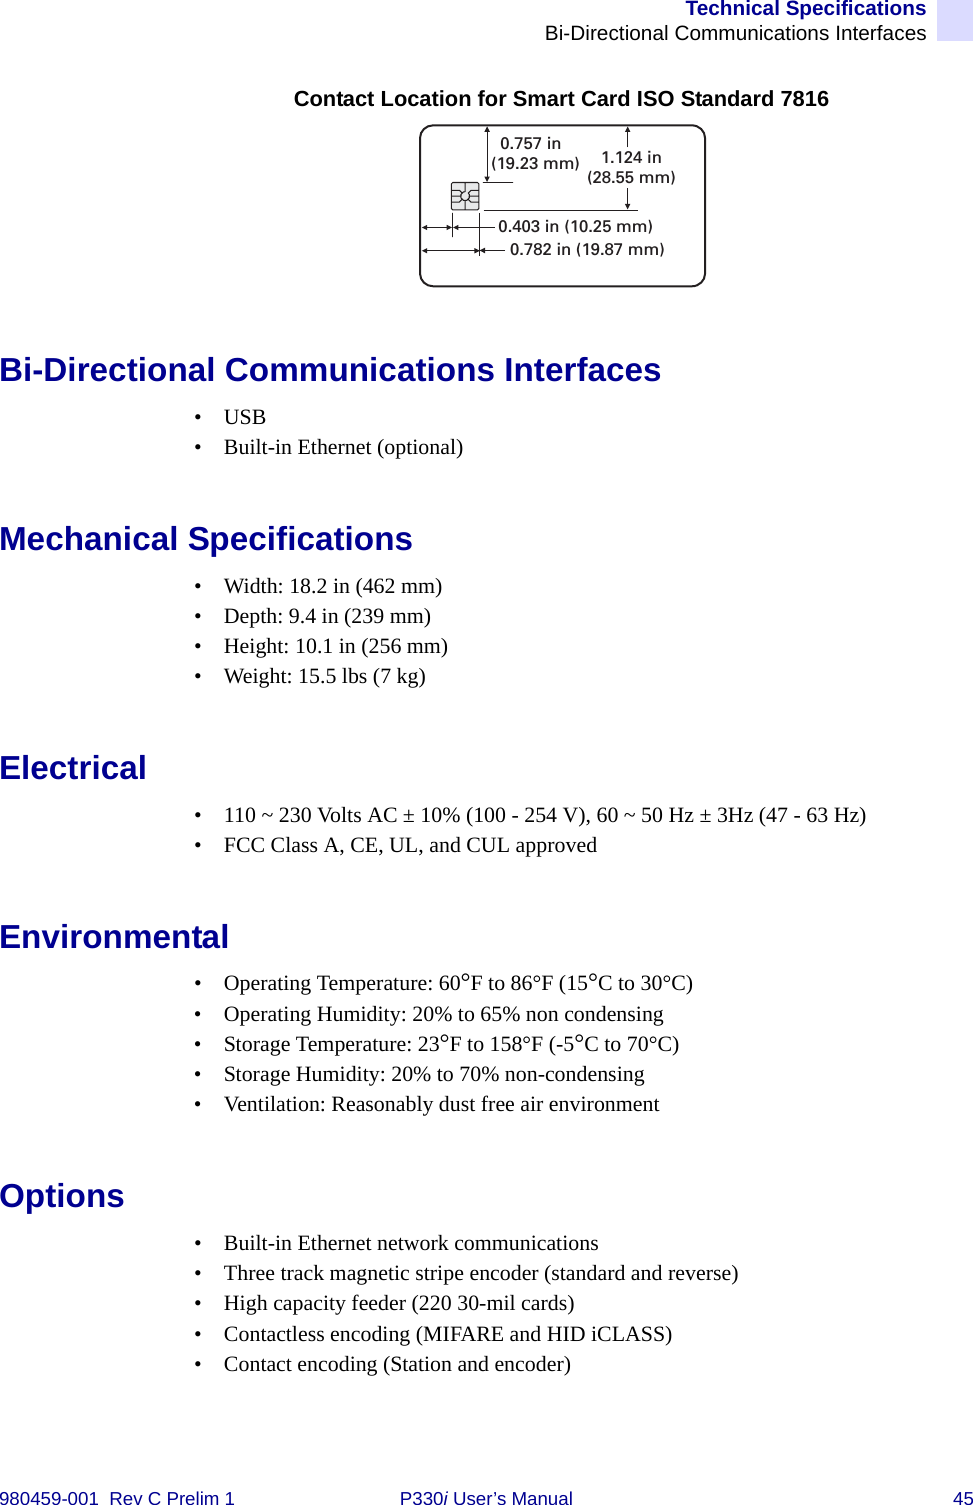 Technical SpecificationsBi-Directional Communications Interfaces980459-001  Rev C Prelim 1 P330i User’s Manual 45Contact Location for Smart Card ISO Standard 7816Bi-Directional Communications Interfaces•USB• Built-in Ethernet (optional)Mechanical Specifications• Width: 18.2 in (462 mm)• Depth: 9.4 in (239 mm)• Height: 10.1 in (256 mm)• Weight: 15.5 lbs (7 kg)Electrical• 110 ~ 230 Volts AC ± 10% (100 - 254 V), 60 ~ 50 Hz ± 3Hz (47 - 63 Hz)• FCC Class A, CE, UL, and CUL approvedEnvironmental• Operating Temperature: 60°F to 86°F (15°C to 30°C)• Operating Humidity: 20% to 65% non condensing• Storage Temperature: 23°F to 158°F (-5°C to 70°C)• Storage Humidity: 20% to 70% non-condensing• Ventilation: Reasonably dust free air environmentOptions• Built-in Ethernet network communications• Three track magnetic stripe encoder (standard and reverse)• High capacity feeder (220 30-mil cards)• Contactless encoding (MIFARE and HID iCLASS)• Contact encoding (Station and encoder)0.403 in (10.25 mm)0.782 in (19.87 mm)0.757 in(19.23 mm) 1.124 in(28.55 mm)